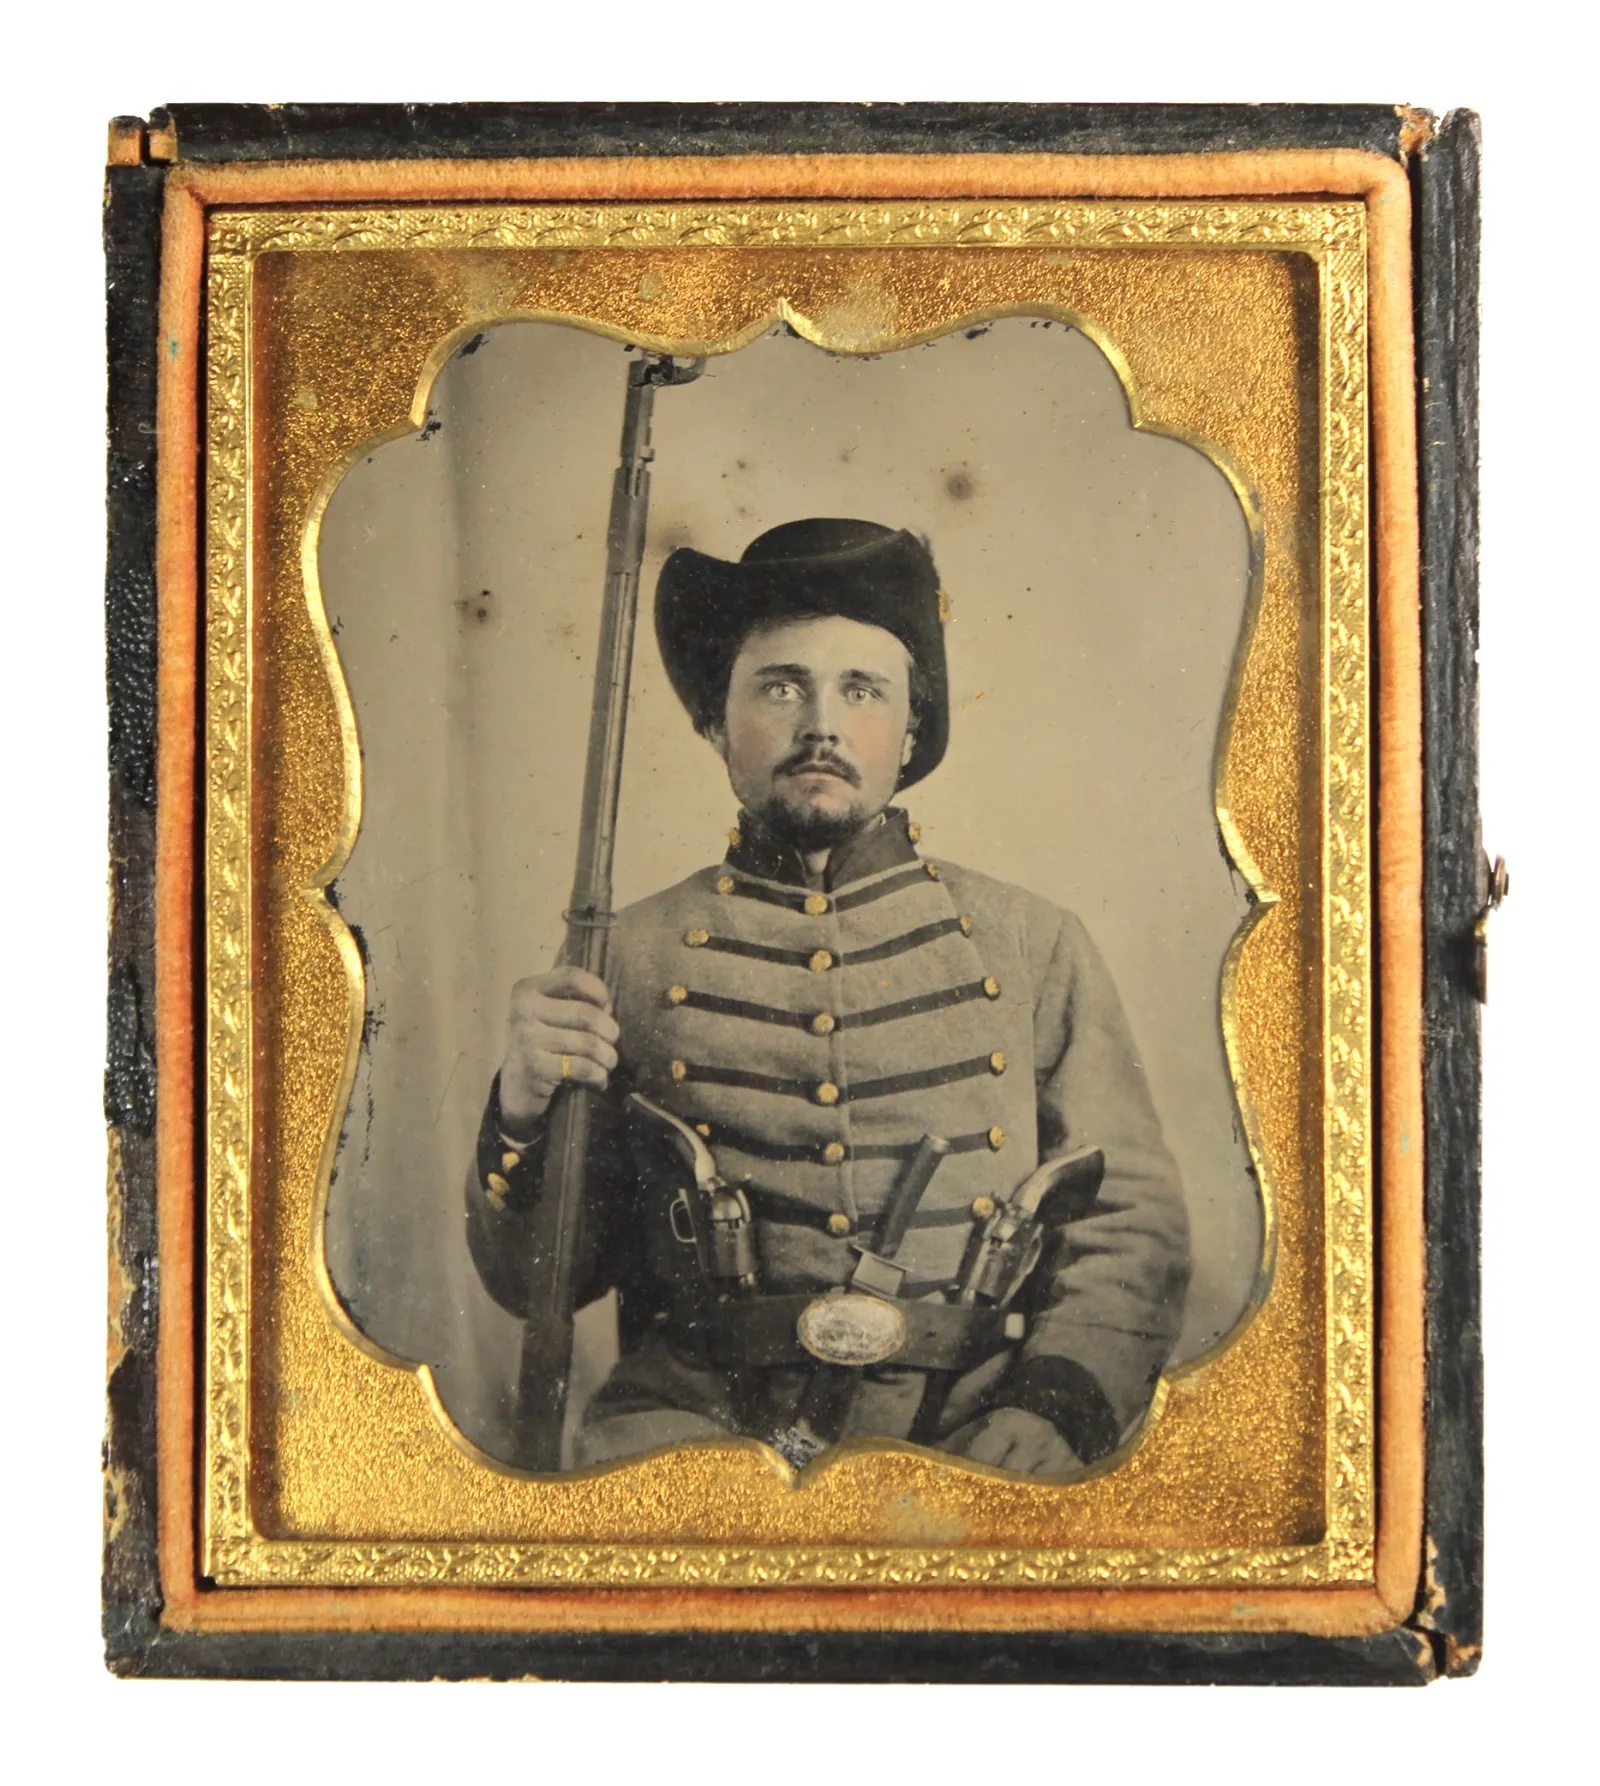 Ambrotype of a CSA soldier with two Colt Navy revolvers, a Bowie knife, and a model 1842 musket, which sold for $12,000 ($14,760 with buyer’s premium) at Fleischer's.
